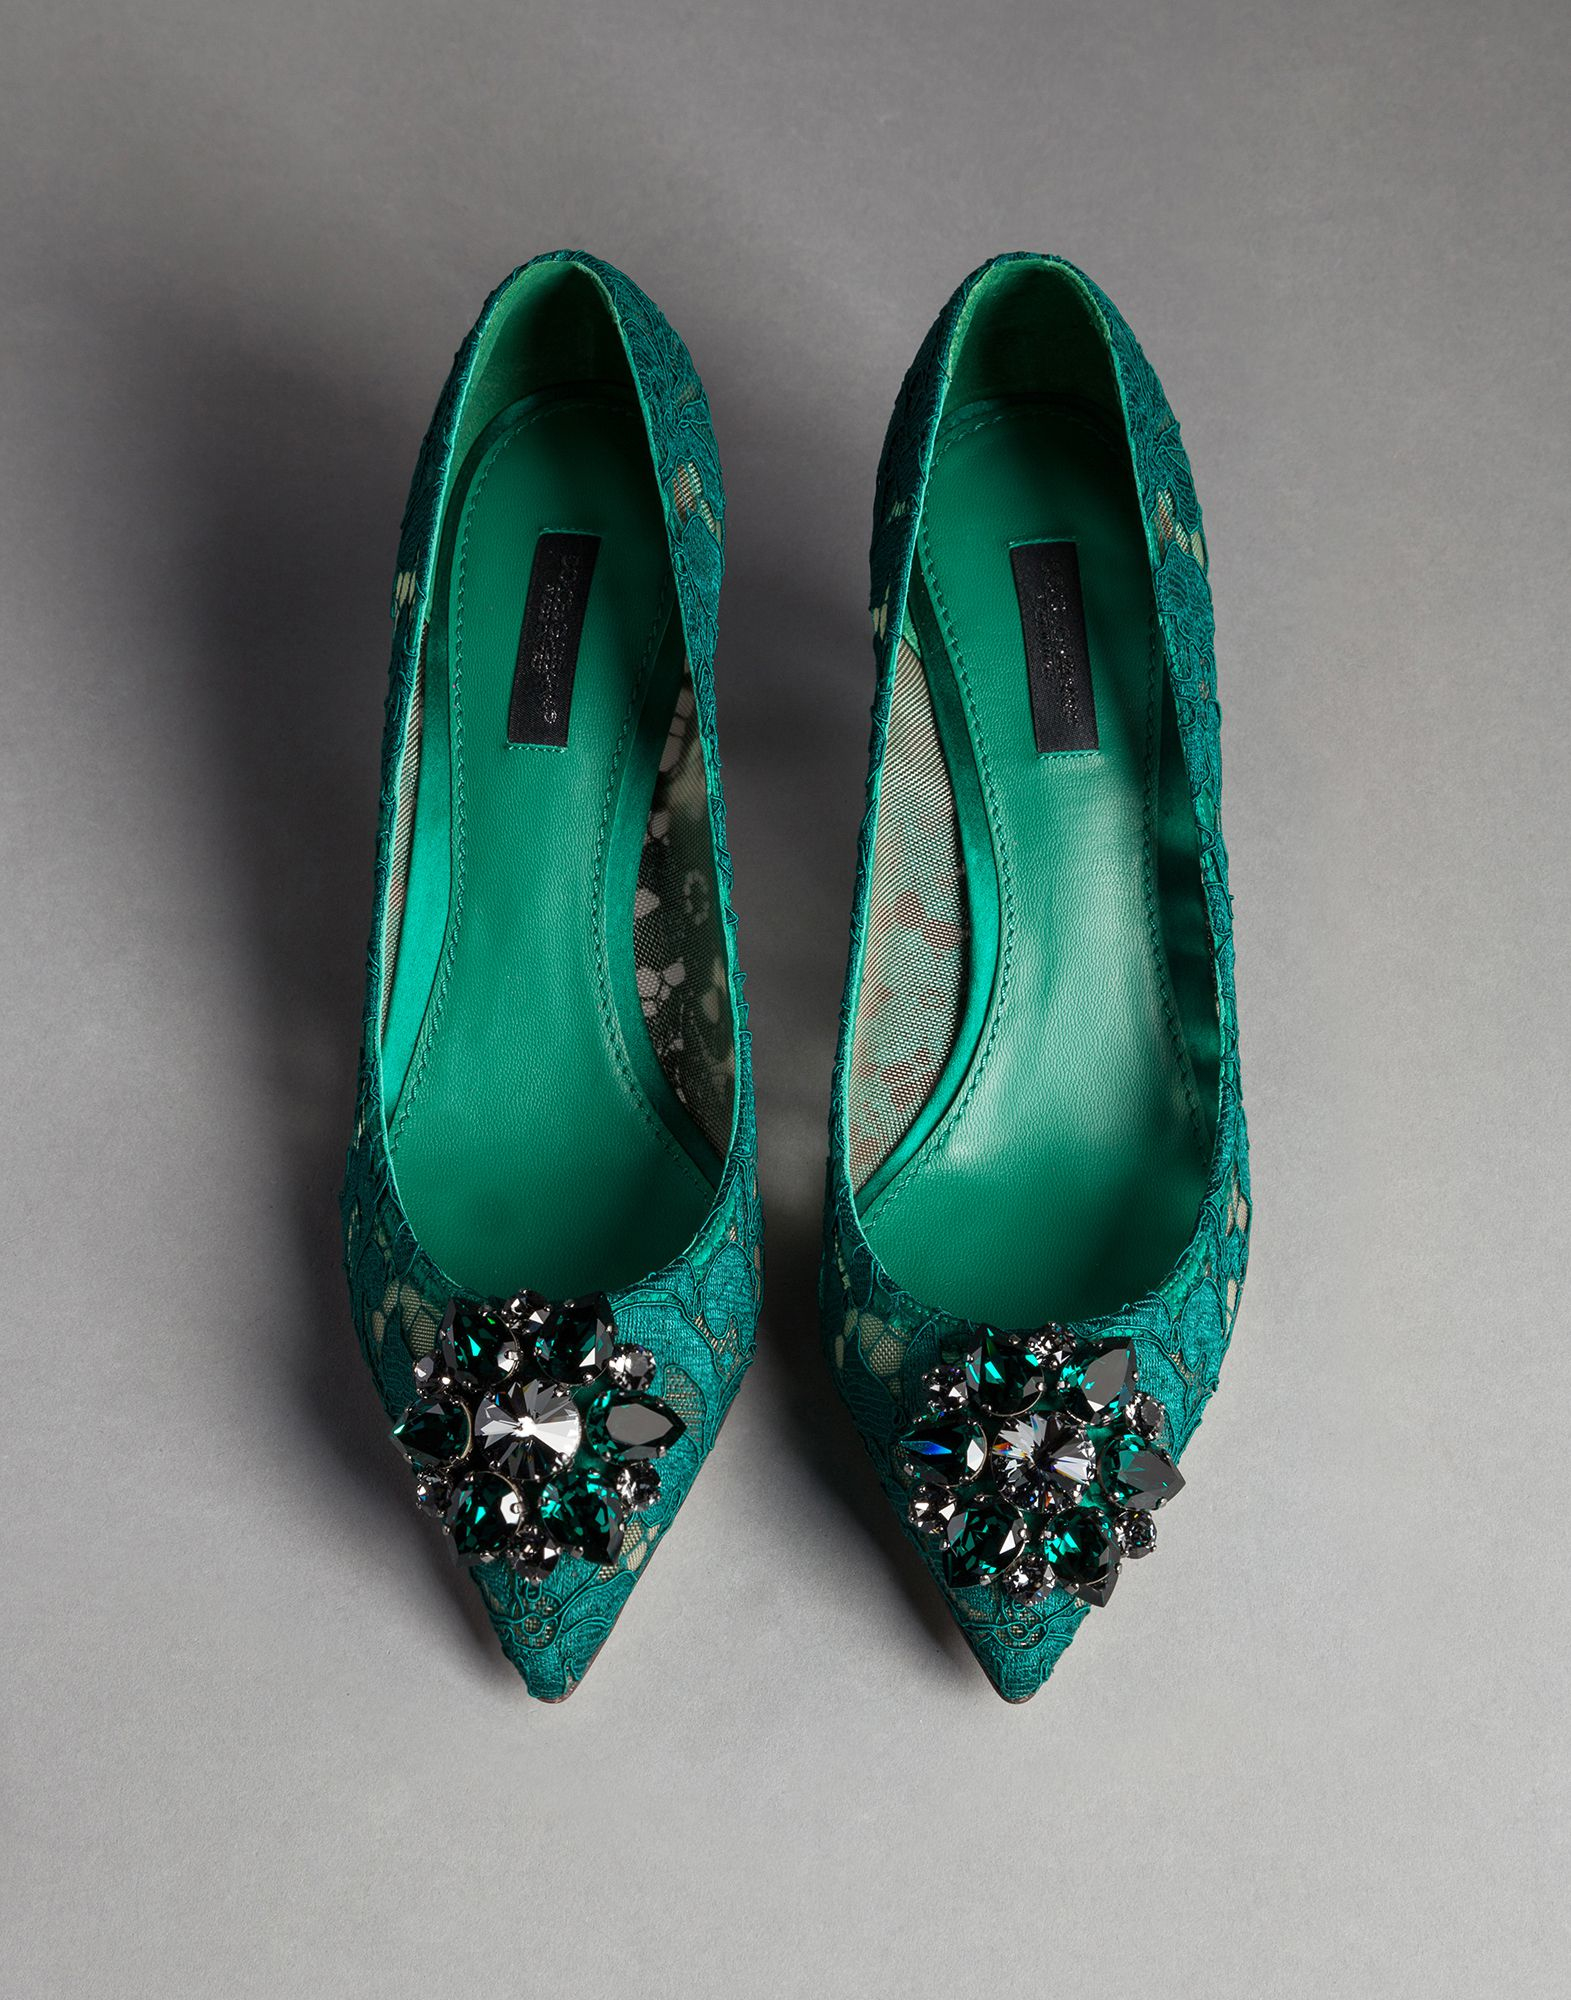 Dolce & Gabbana Bellucci Embellished Lace Pumps in Green - Lyst